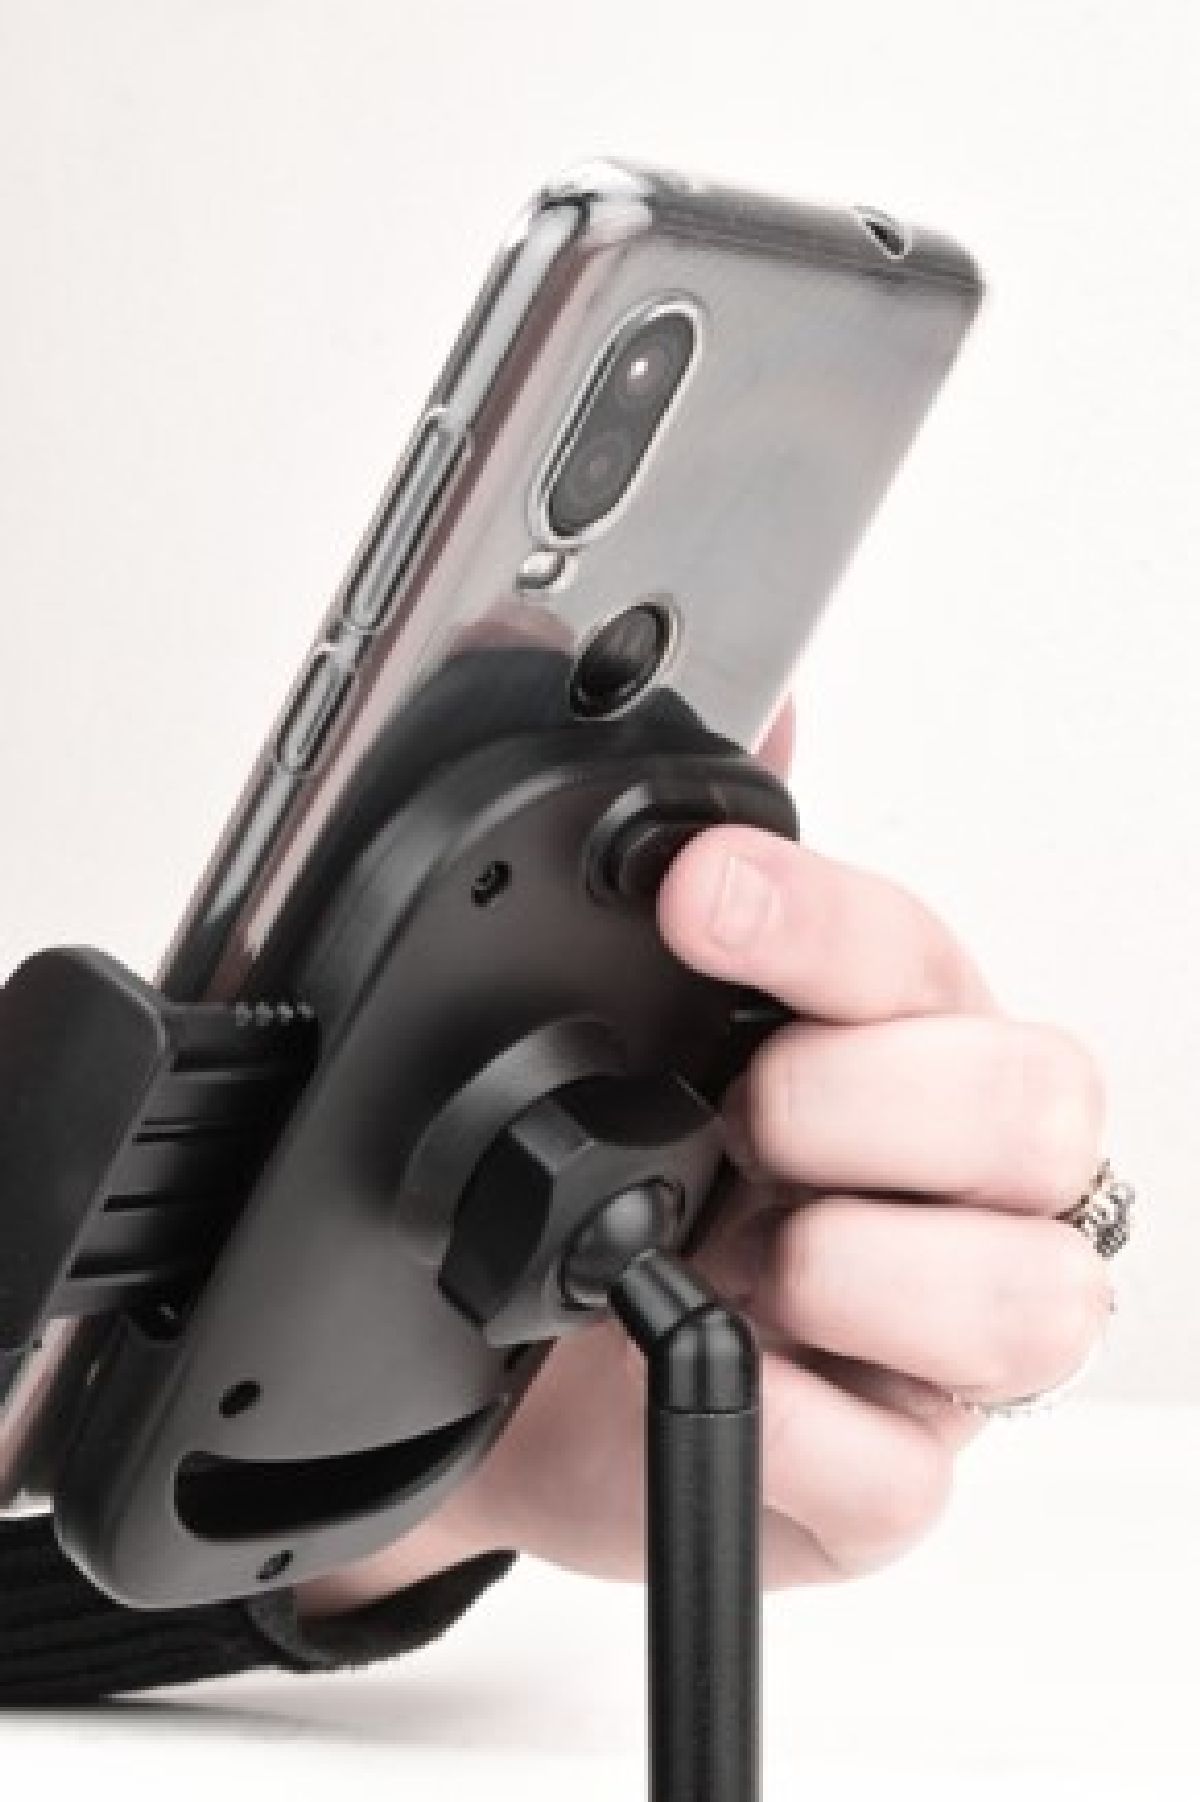 Support universel pour smartphone 